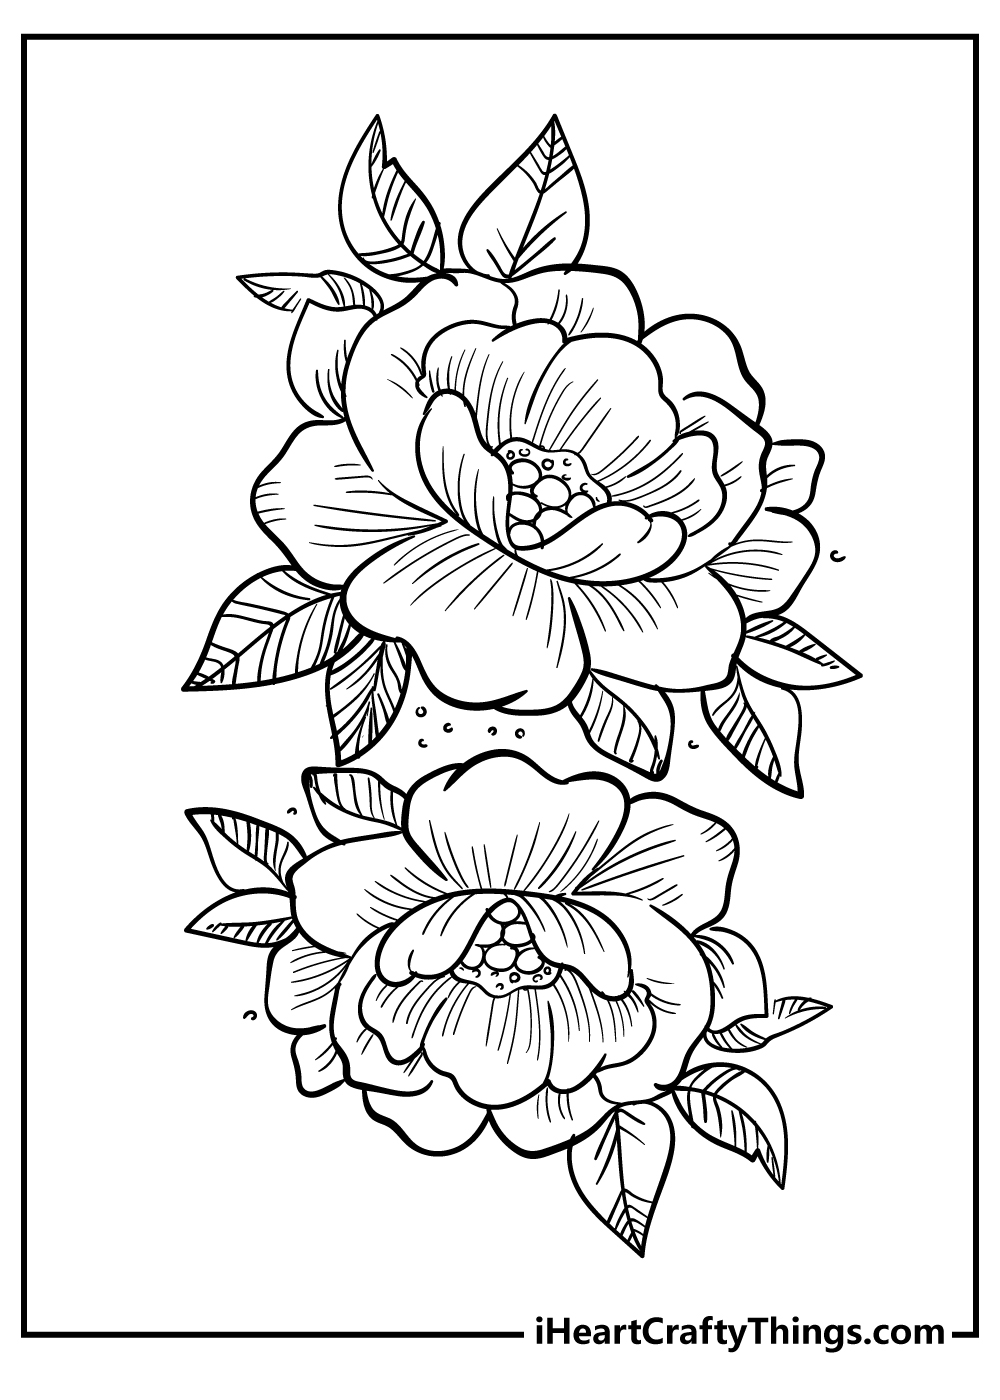 Flower coloring pages free printables